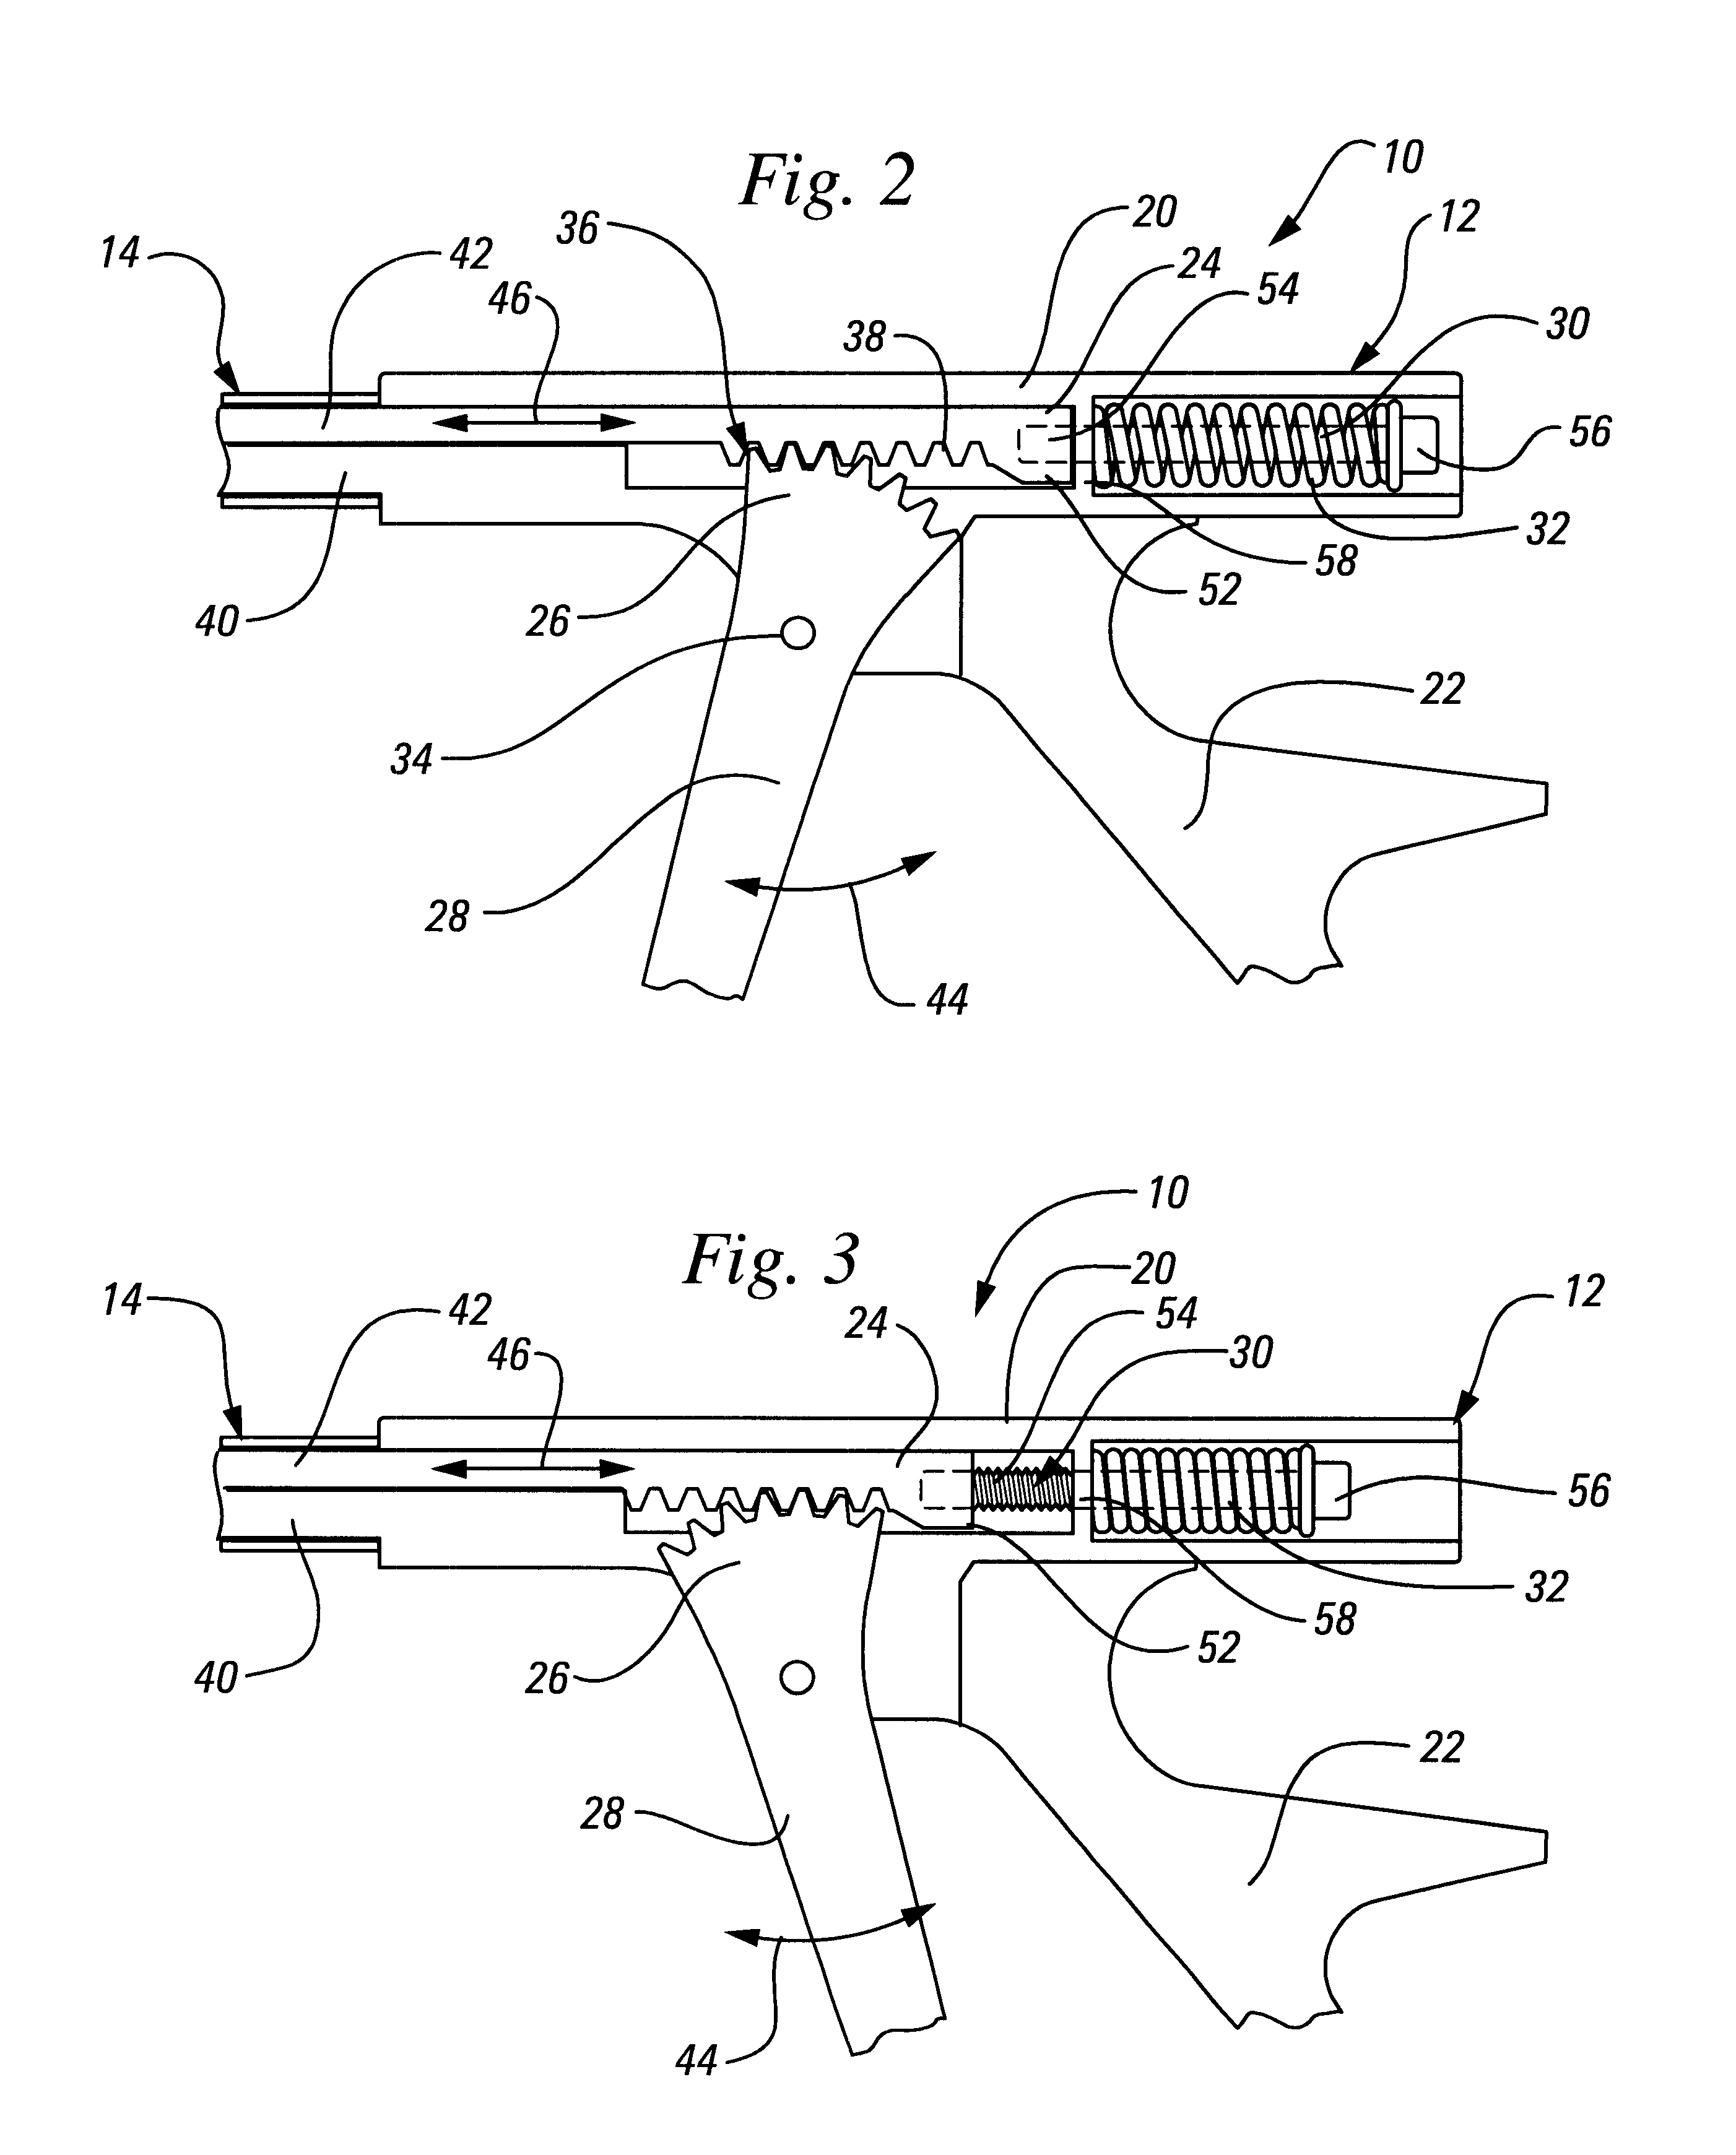 Circumferential resecting reamer tool